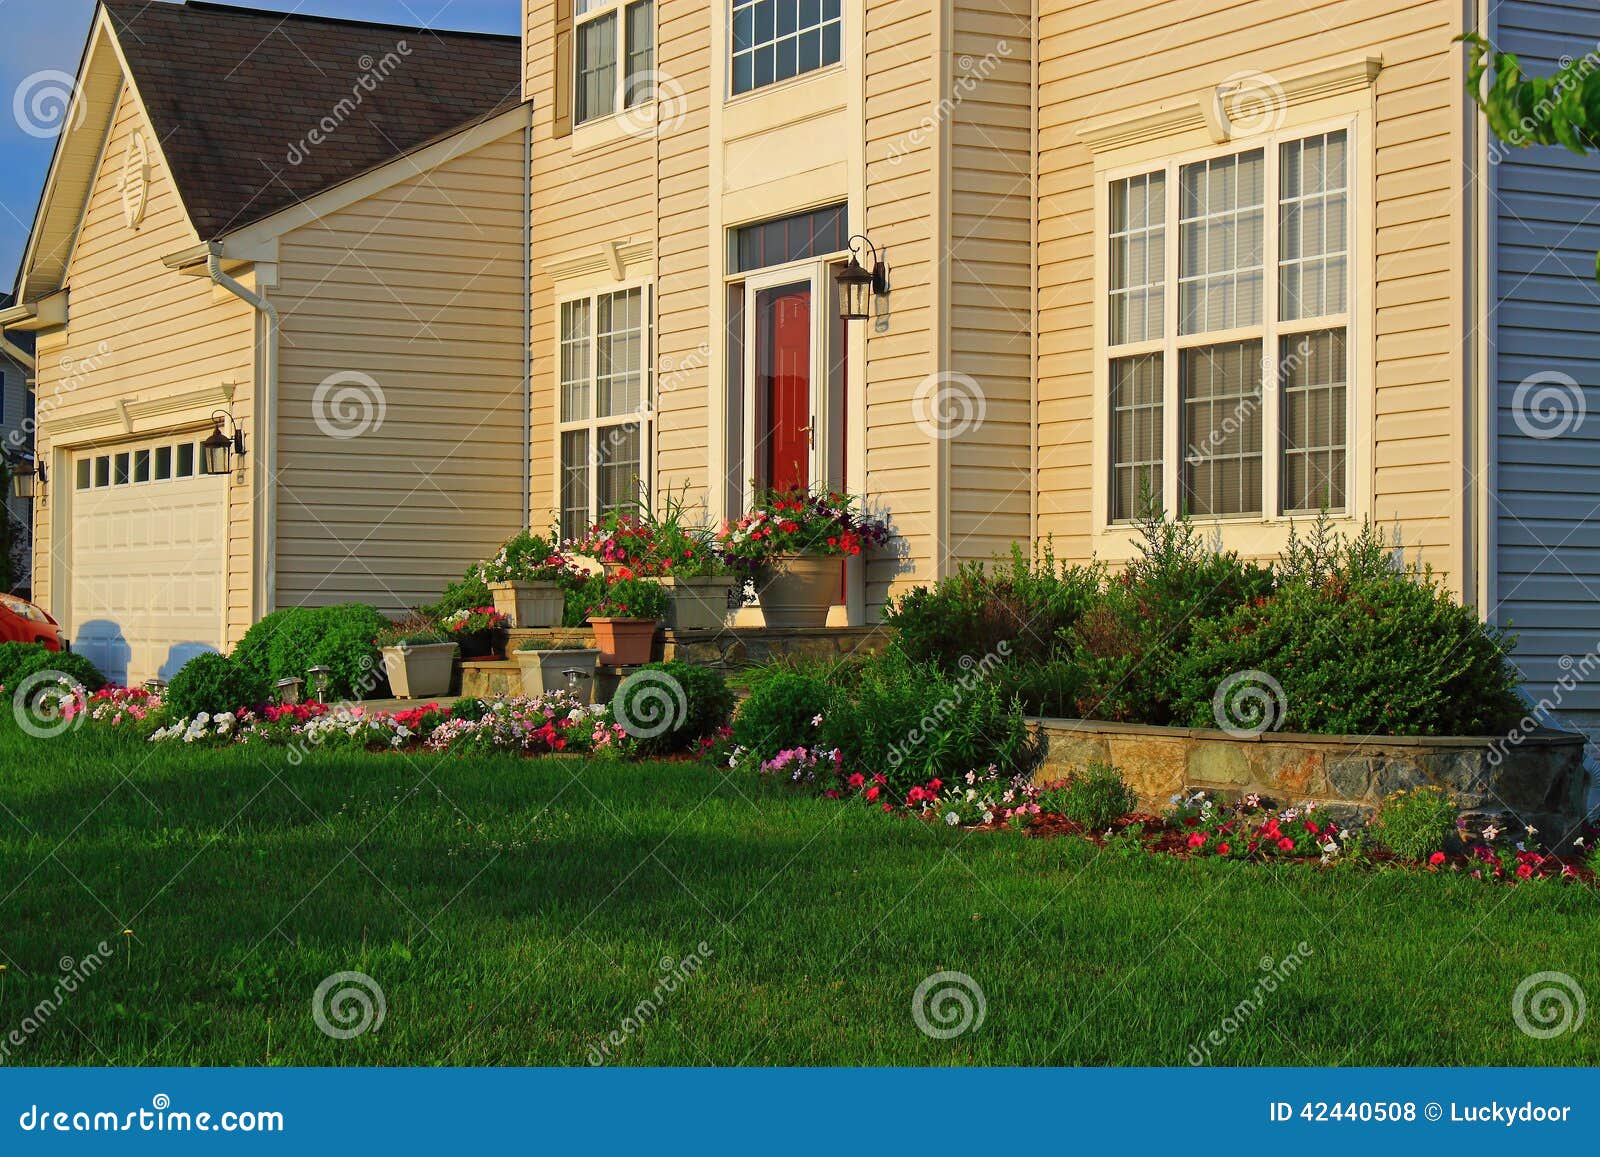 single house with landscaping